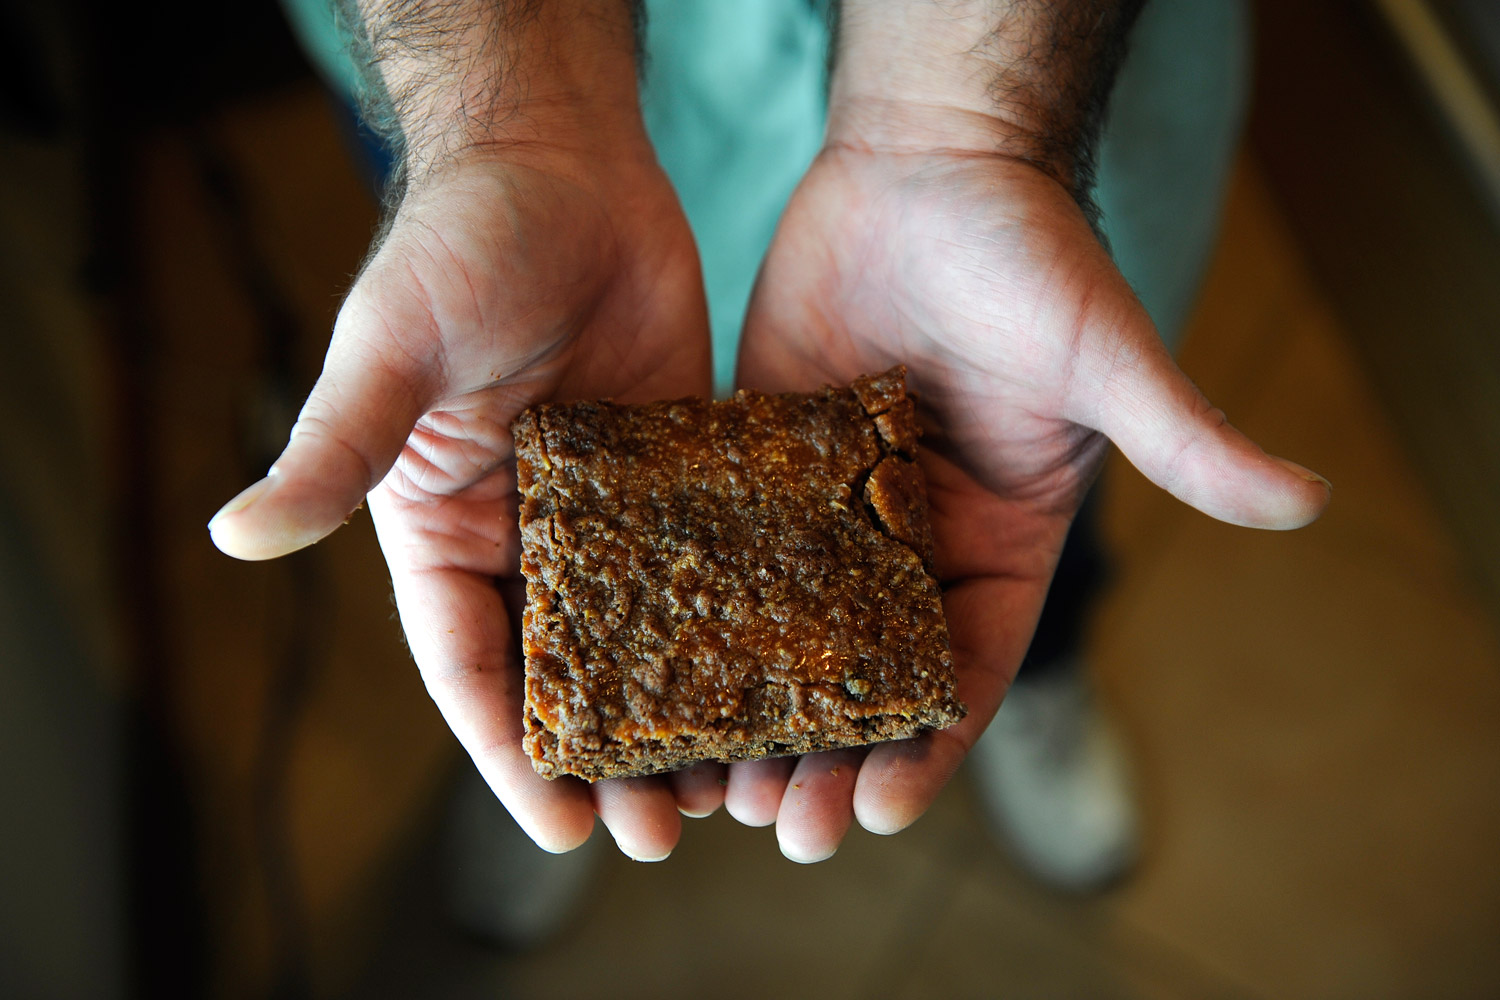 Texas teen could face life in prison over case involving pot brownies